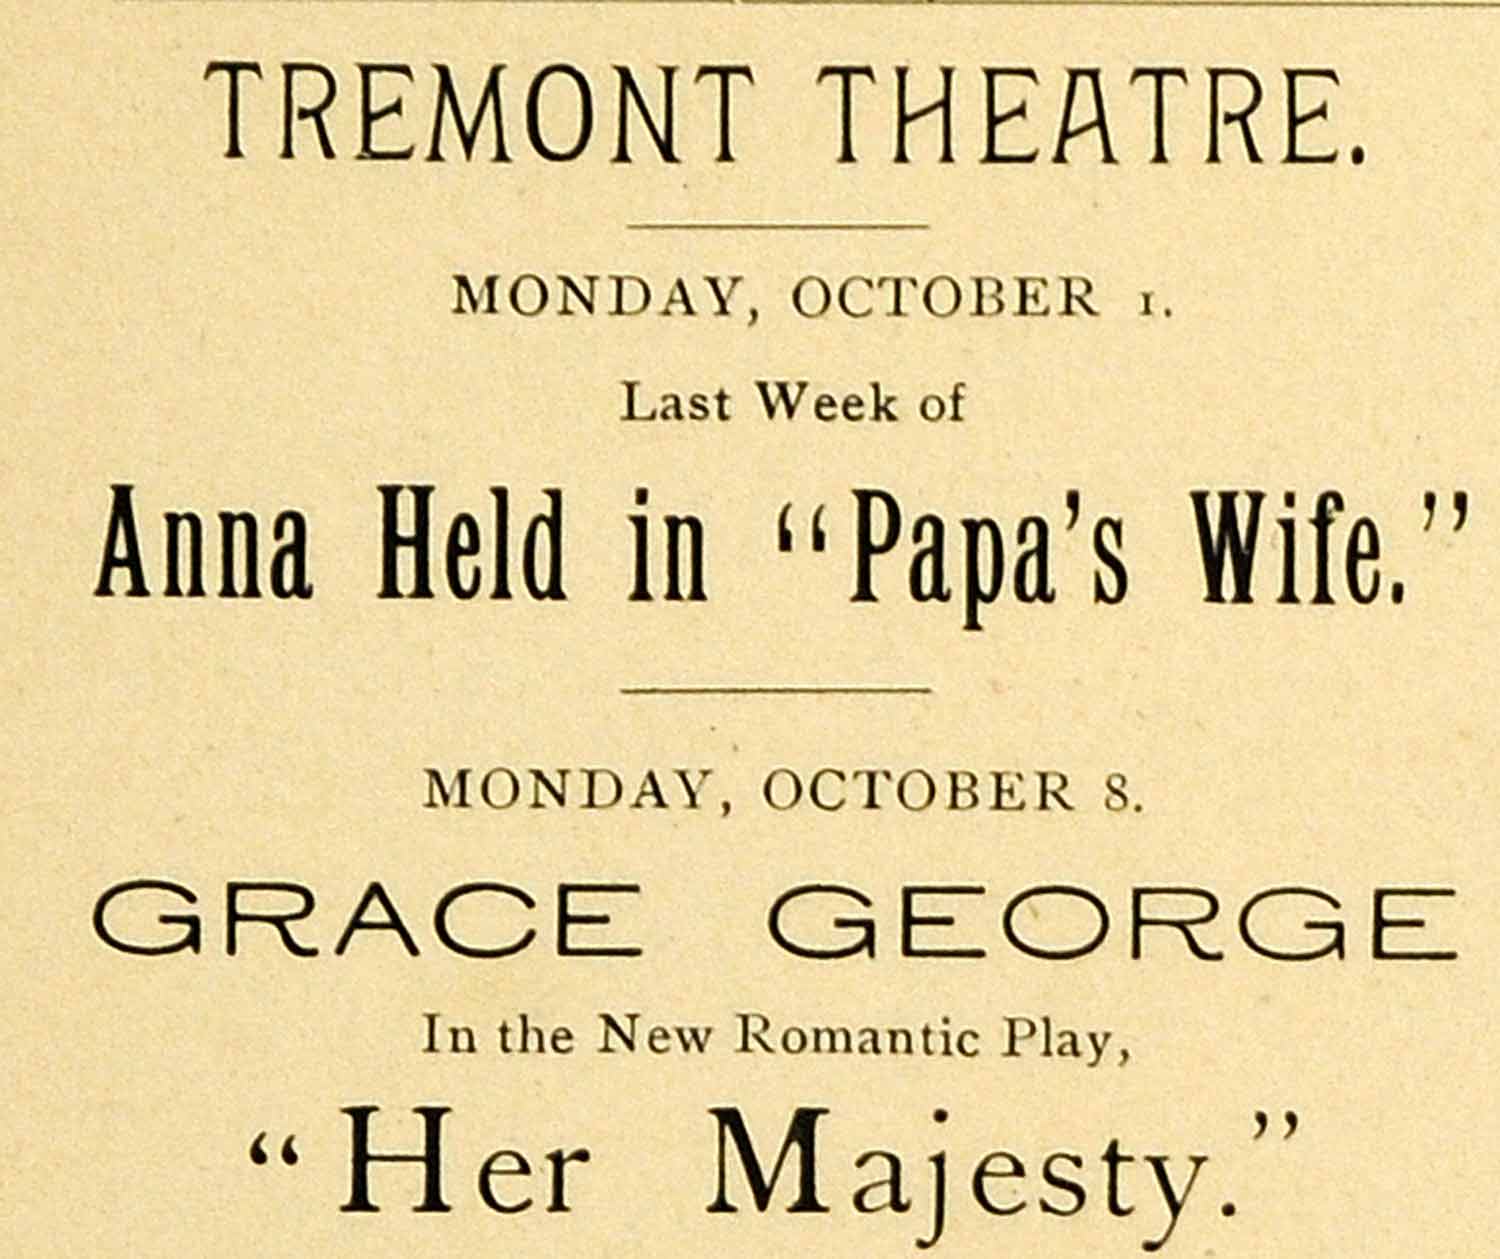 1900 Ad Tremont Theater Anna Held Papa's Wife Grace George Her Majesty HVD1